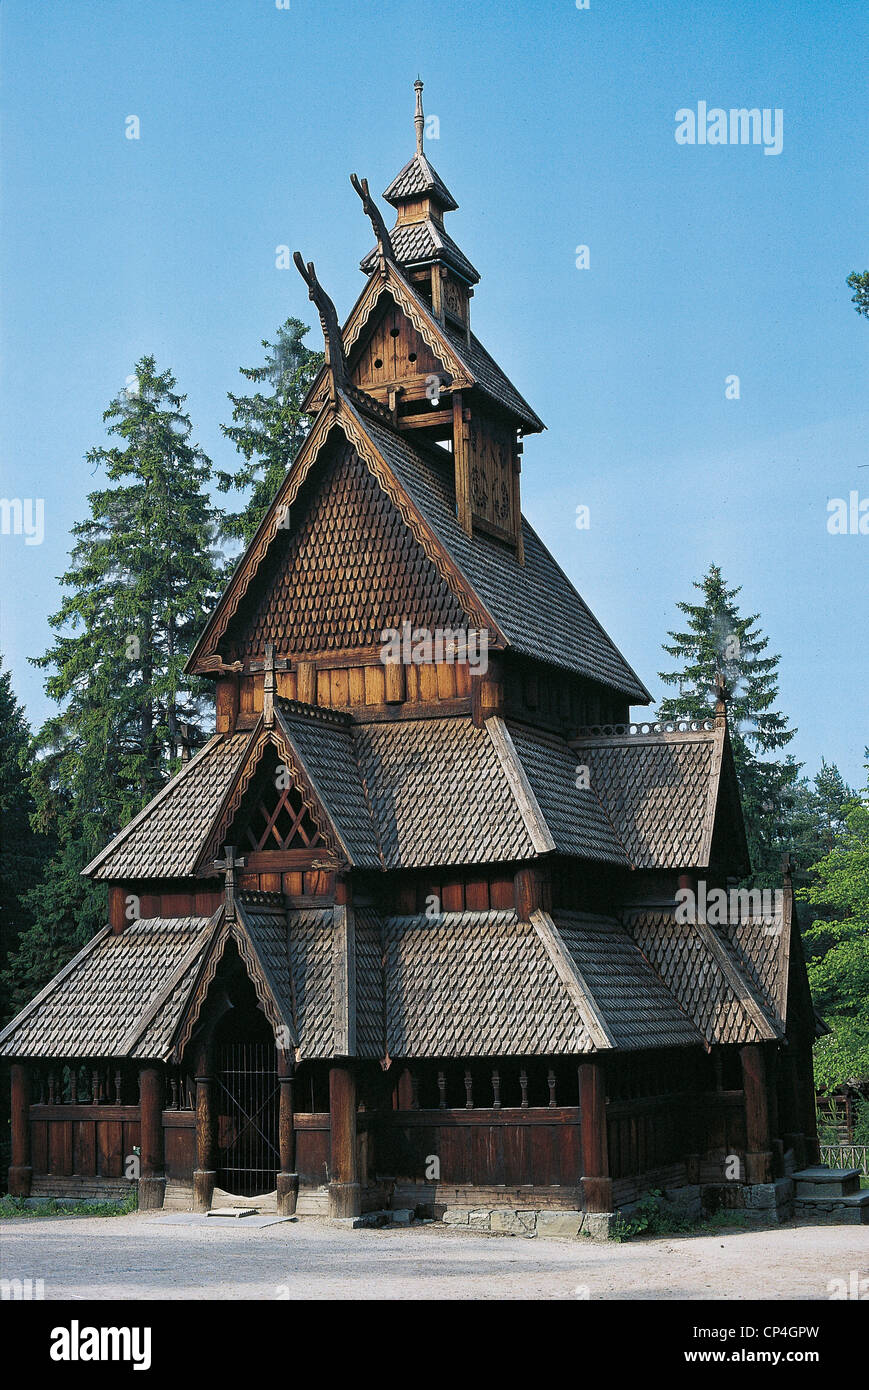 Norway - Oslo - Norwegian Folk Museum (Norsk Folkemuseum), outdoor ethnographic museum. Wooden church: Gol stave church. Stock Photo